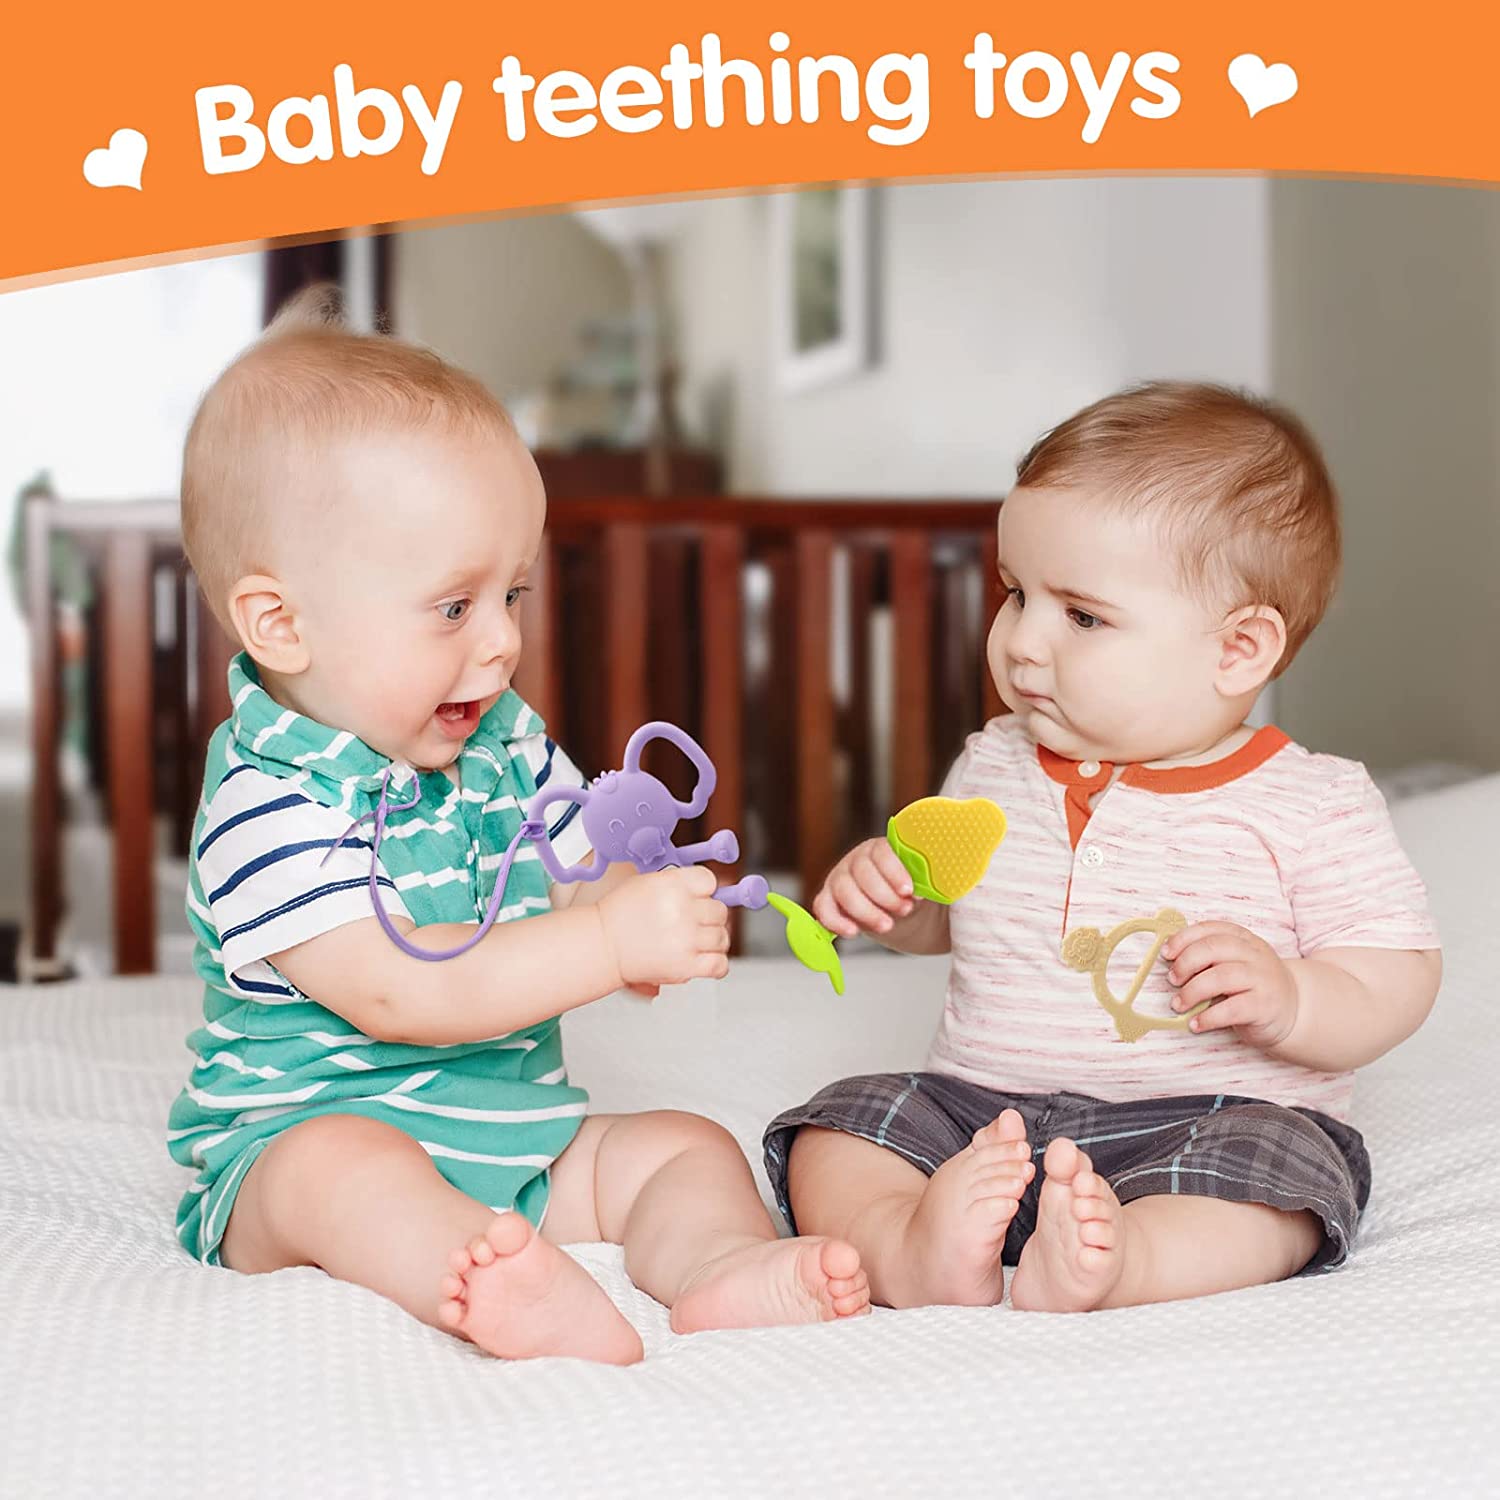 Safeswee Baby Teething Toys 2 Pieces Silicone Baby Teether Freezer Saf